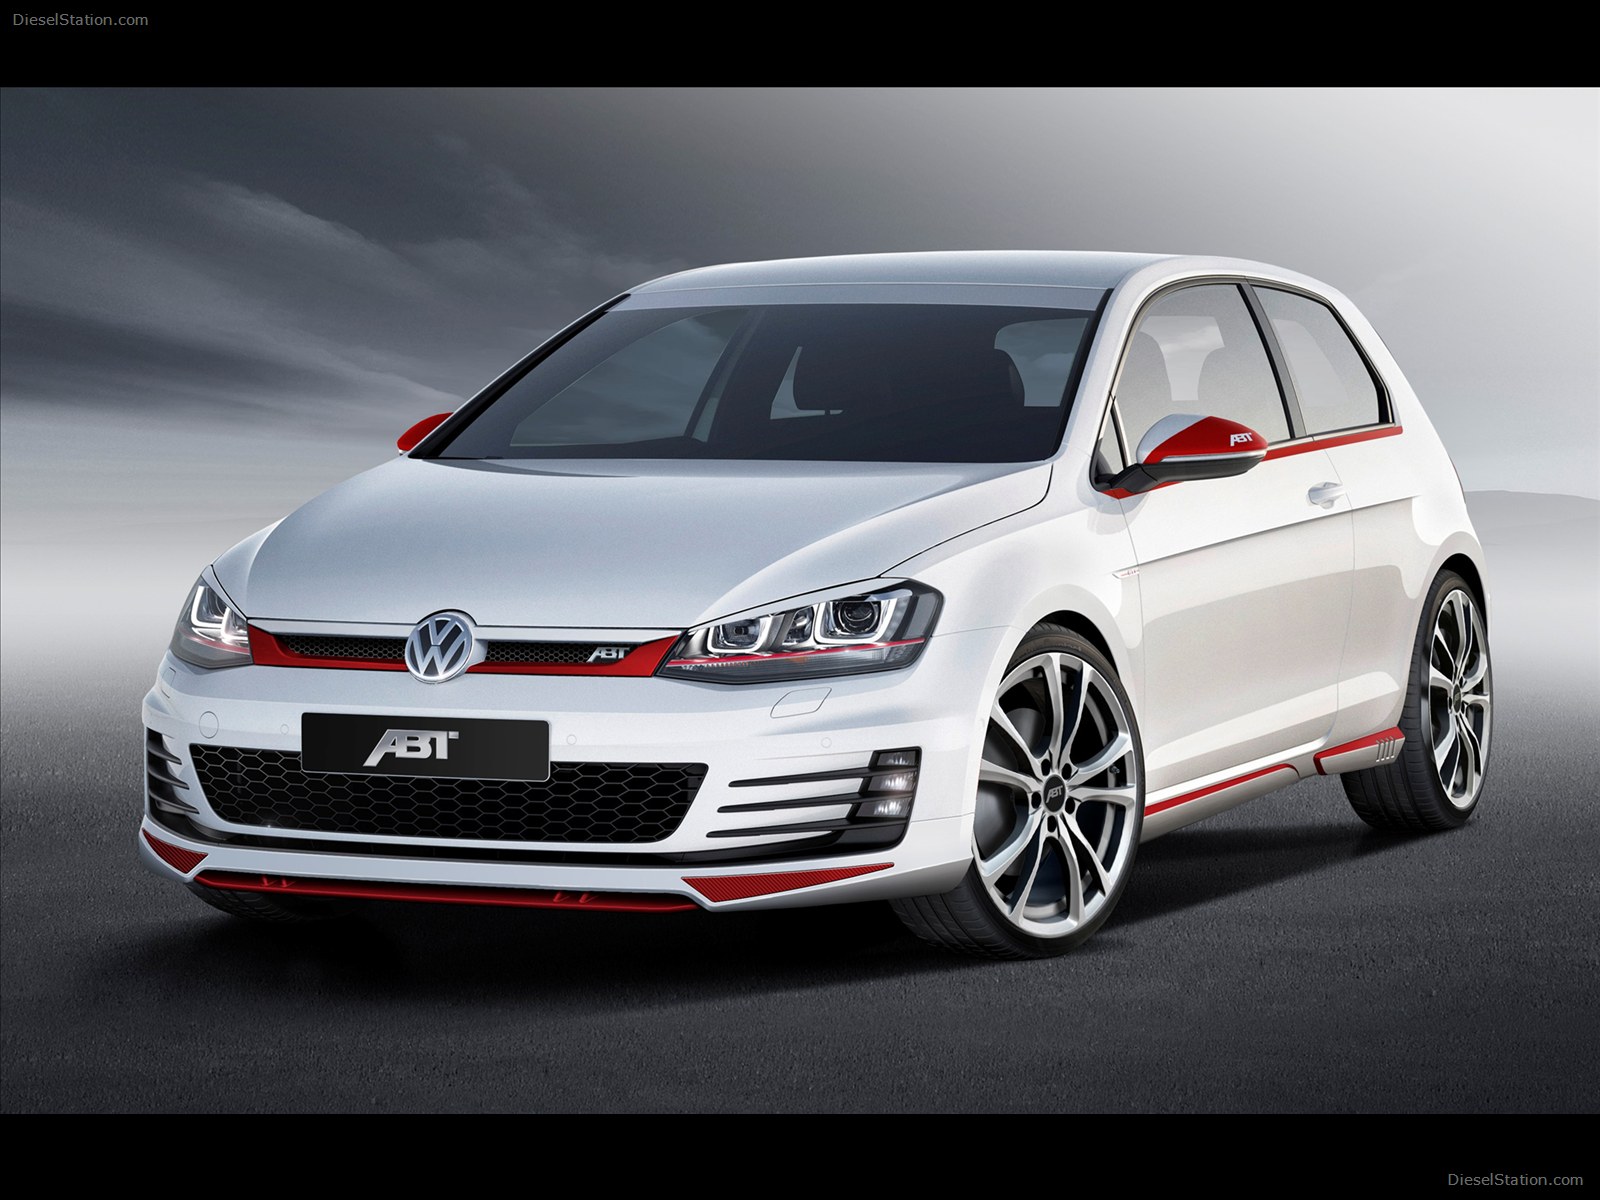 ABT VW Golf VII GTI 2013 Exotic Car Picture 01 of 4 Diesel Station